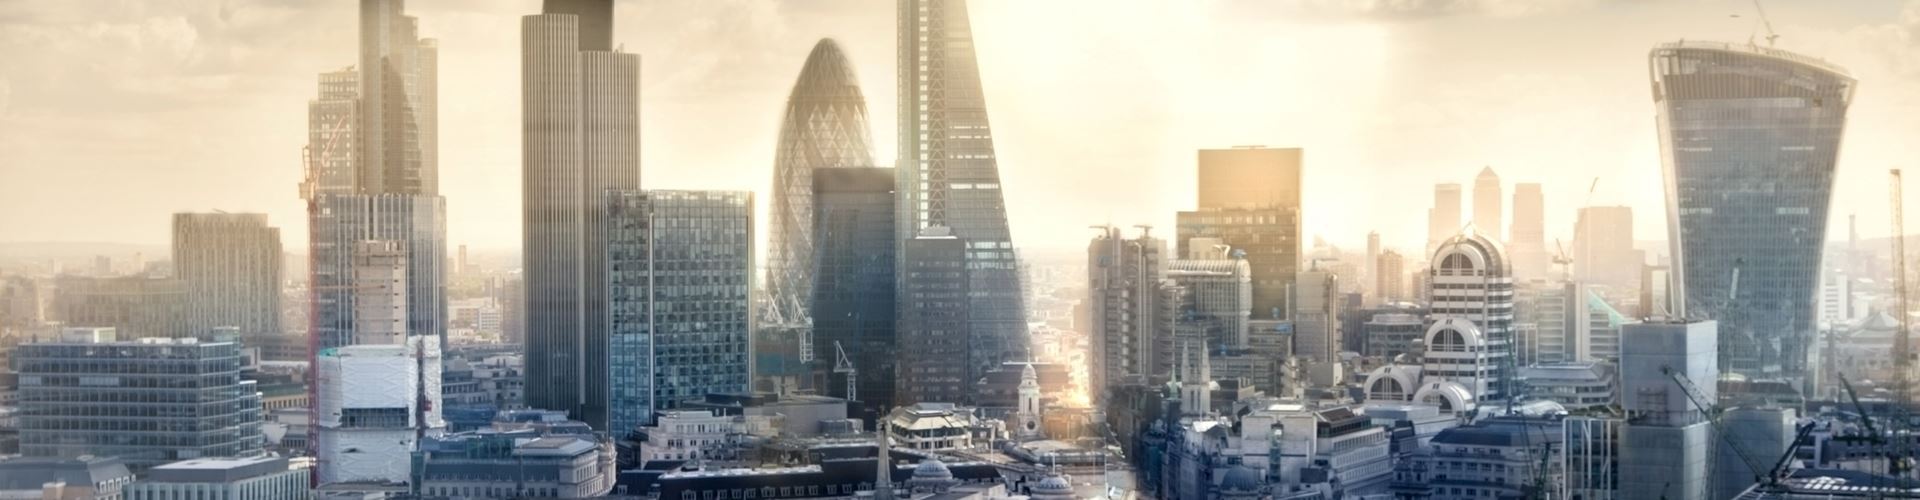 London SMEs most aware of alternative financing options